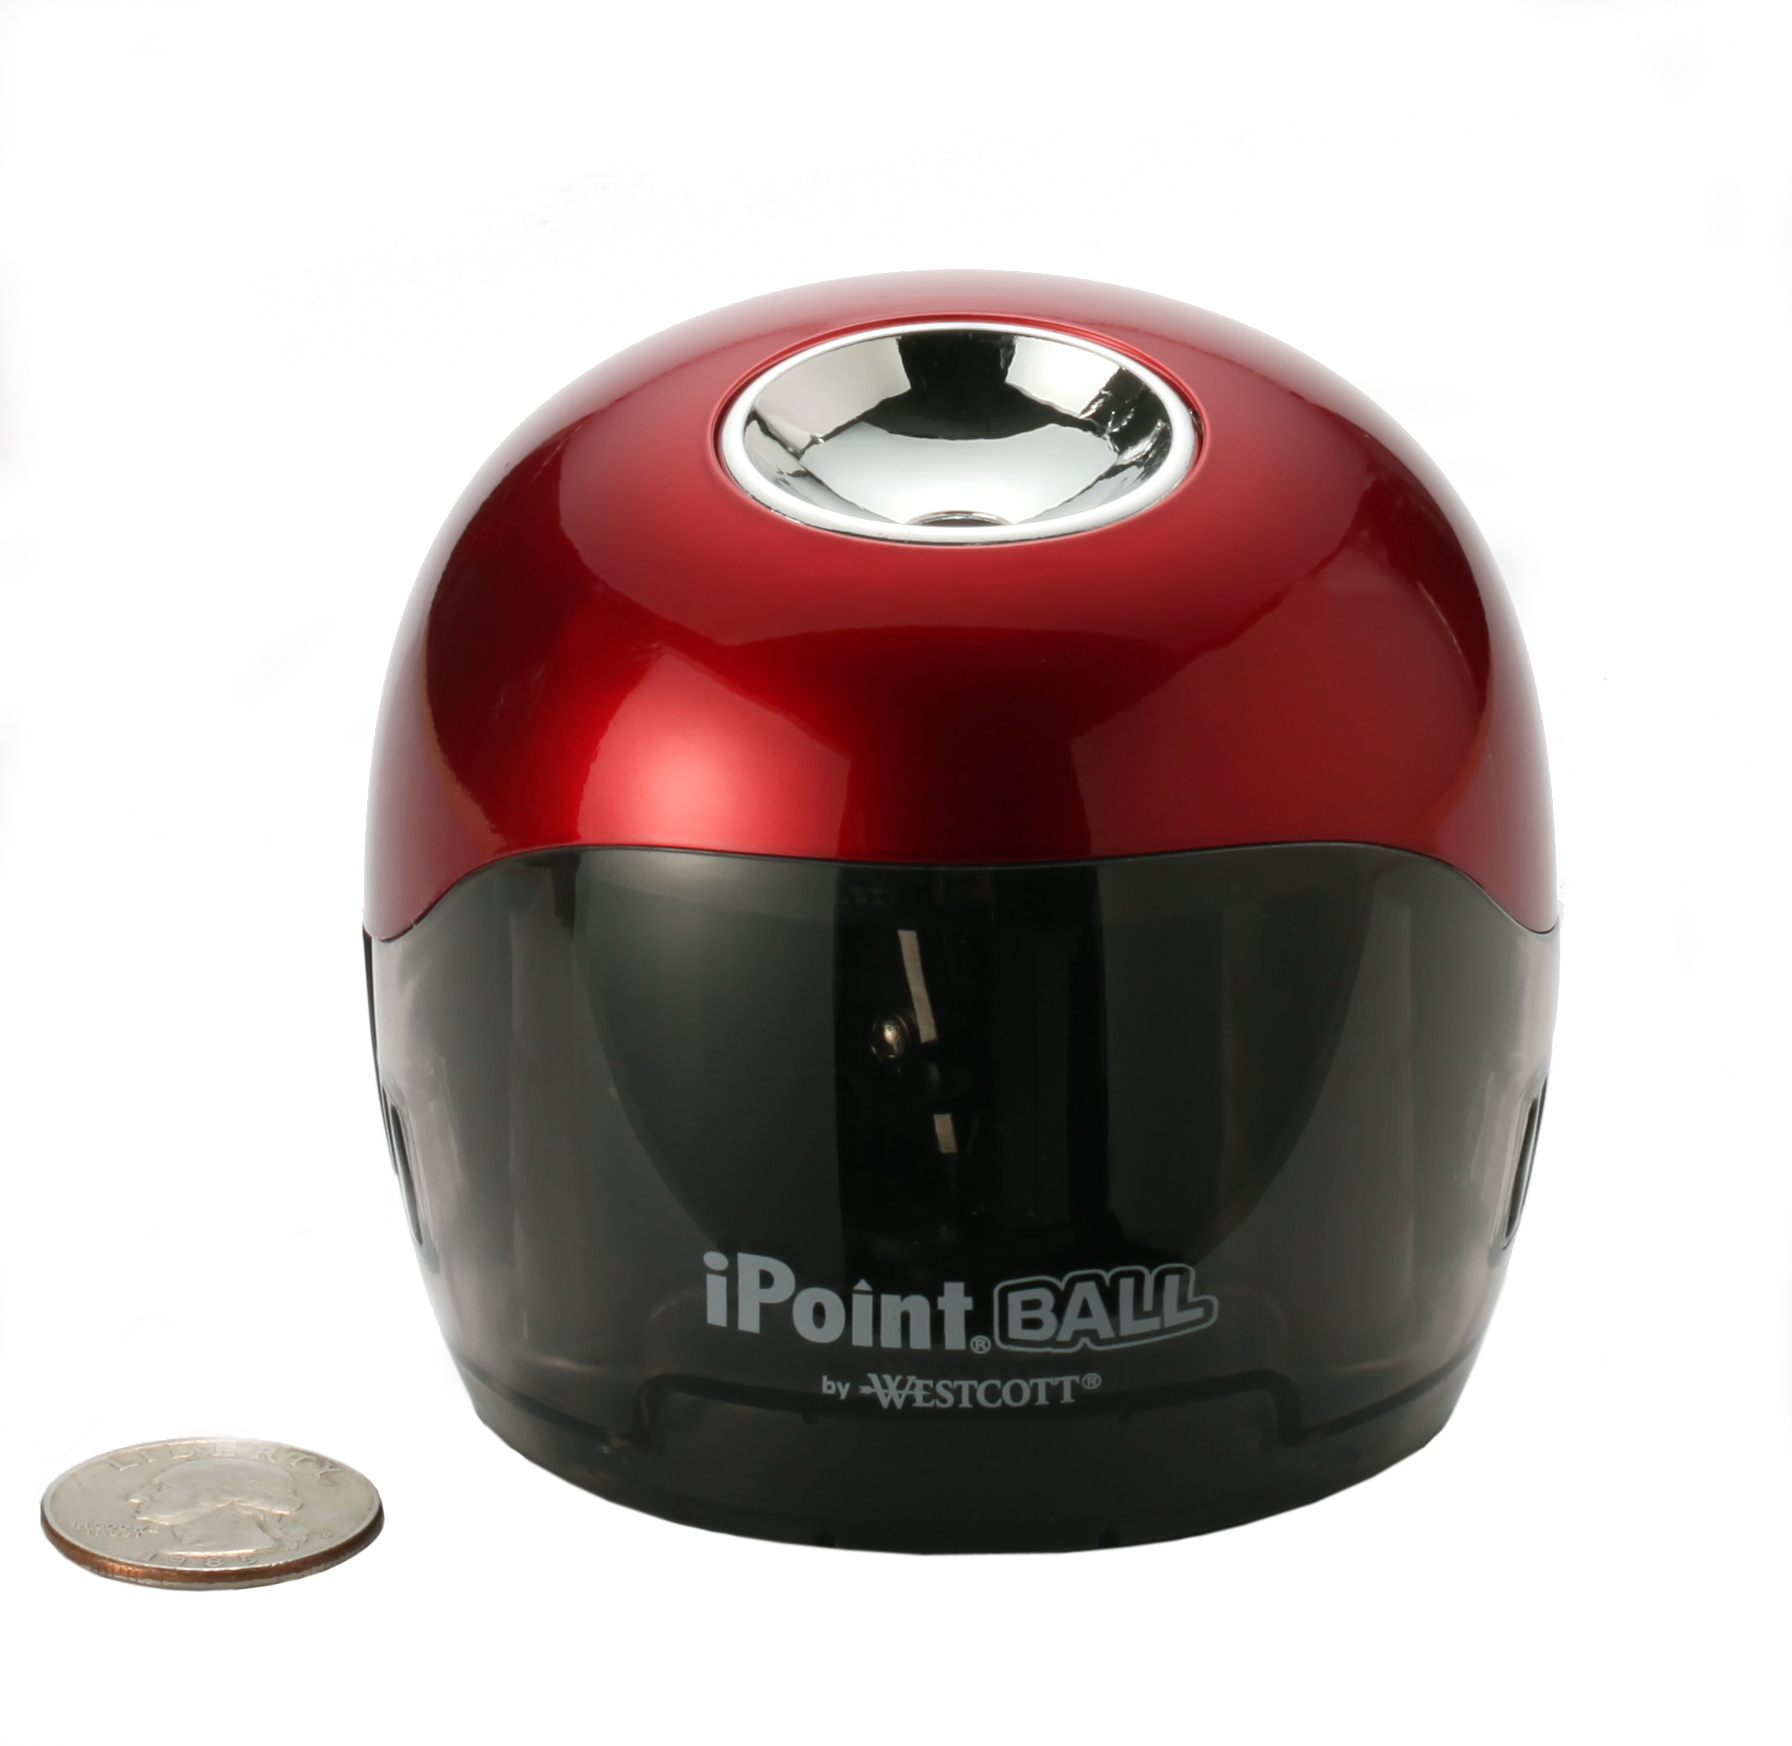 Westcott New iPoint Ball Battery Sharpener, for Office, 3w x 3d x 3 1/3h, Red, 1-Count - image 4 of 10